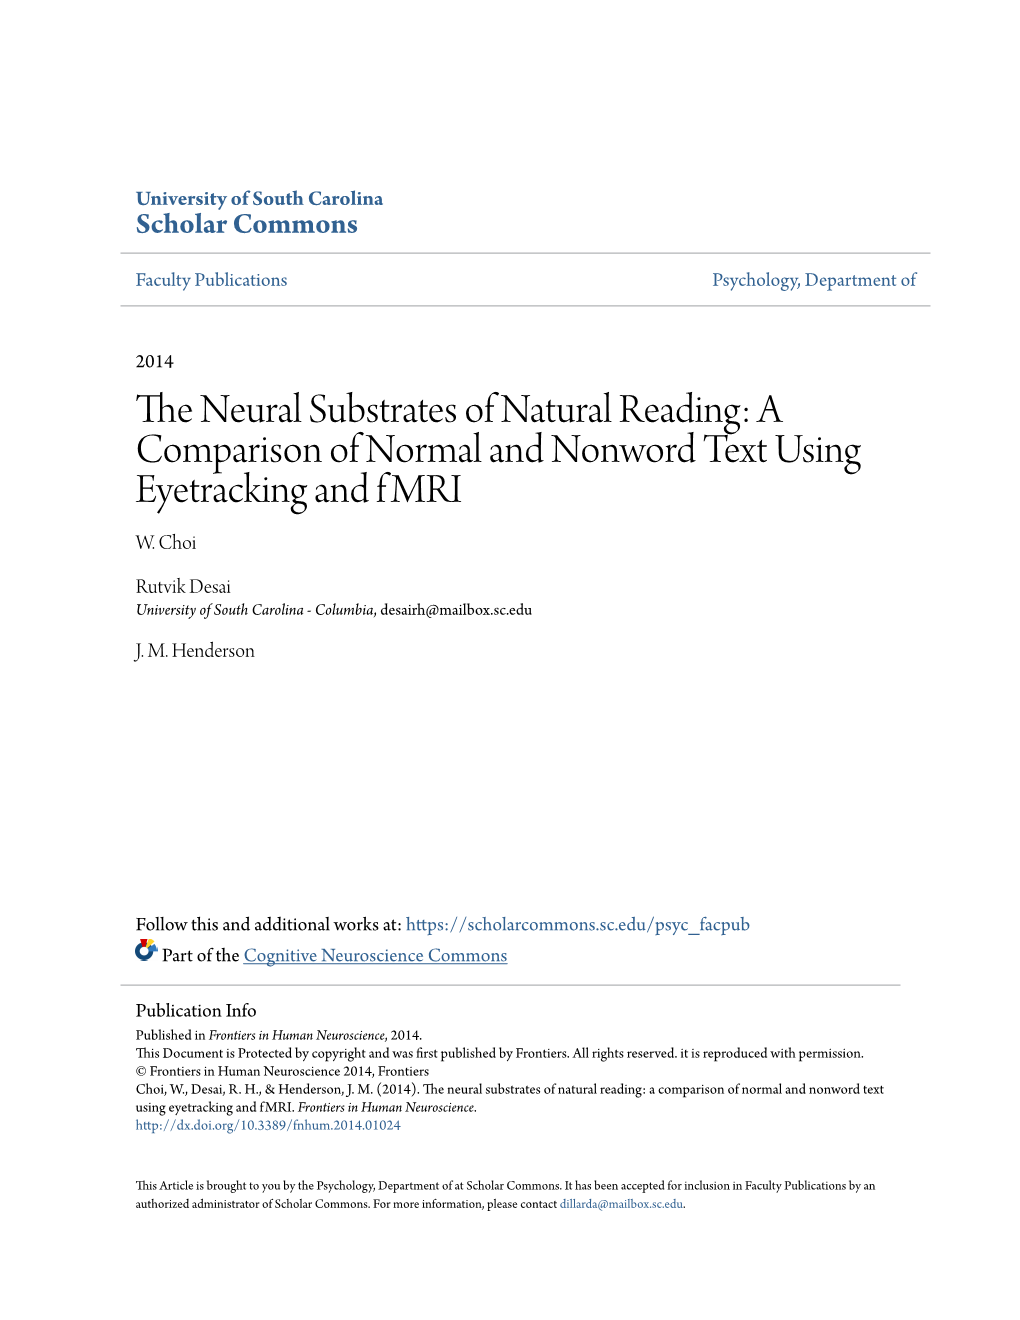 The Neural Substrates of Natural Reading: a Comparison of Normal and Nonword Text Using Eyetracking and Fmri